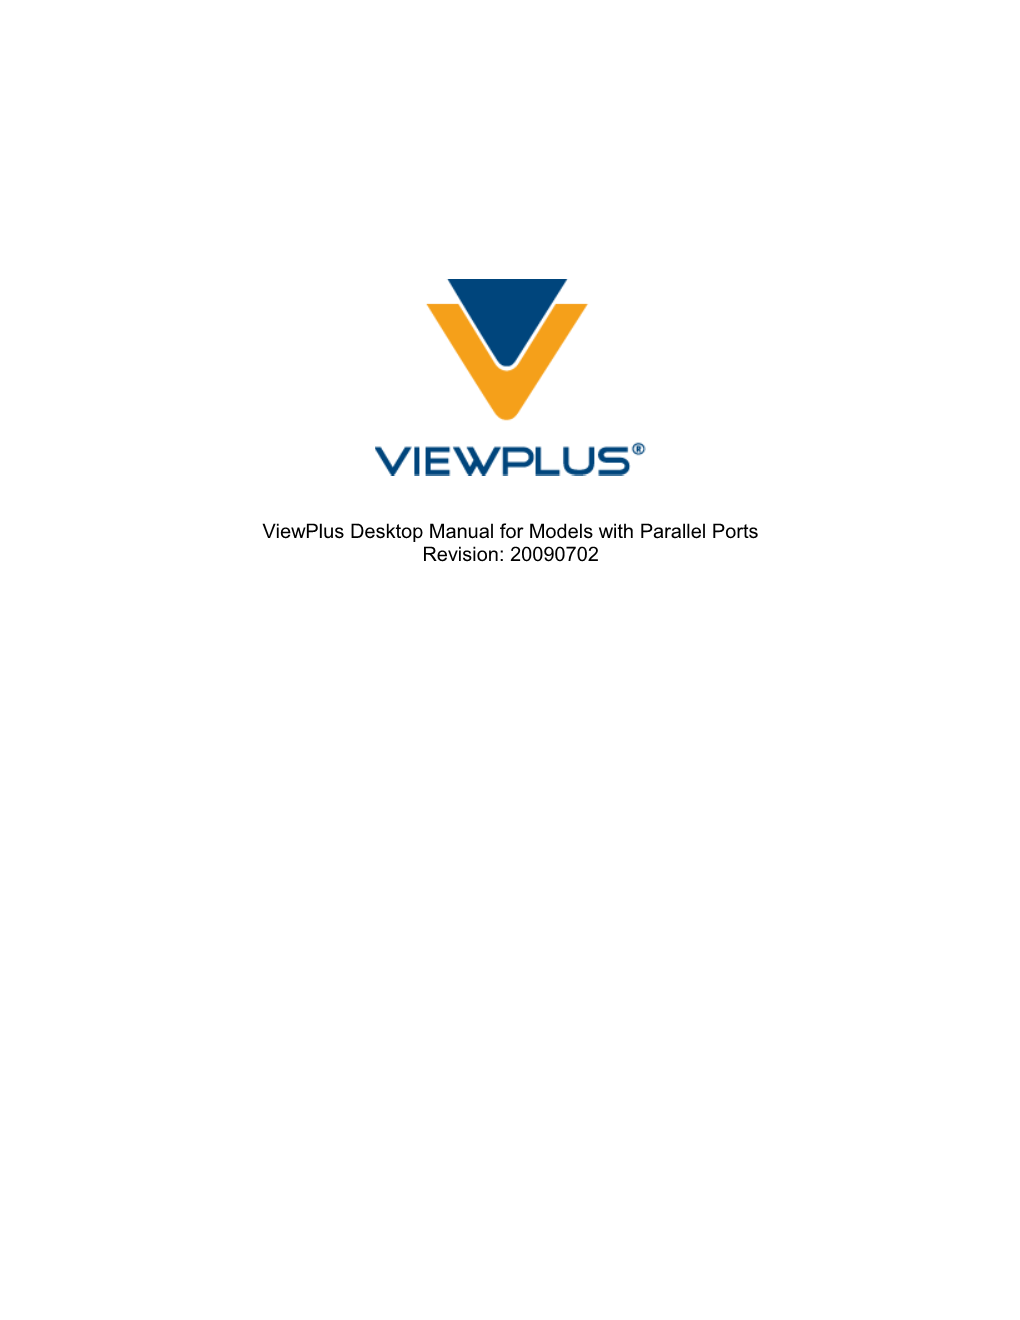 Viewplus Desktop Manual for Models with Parallel Ports